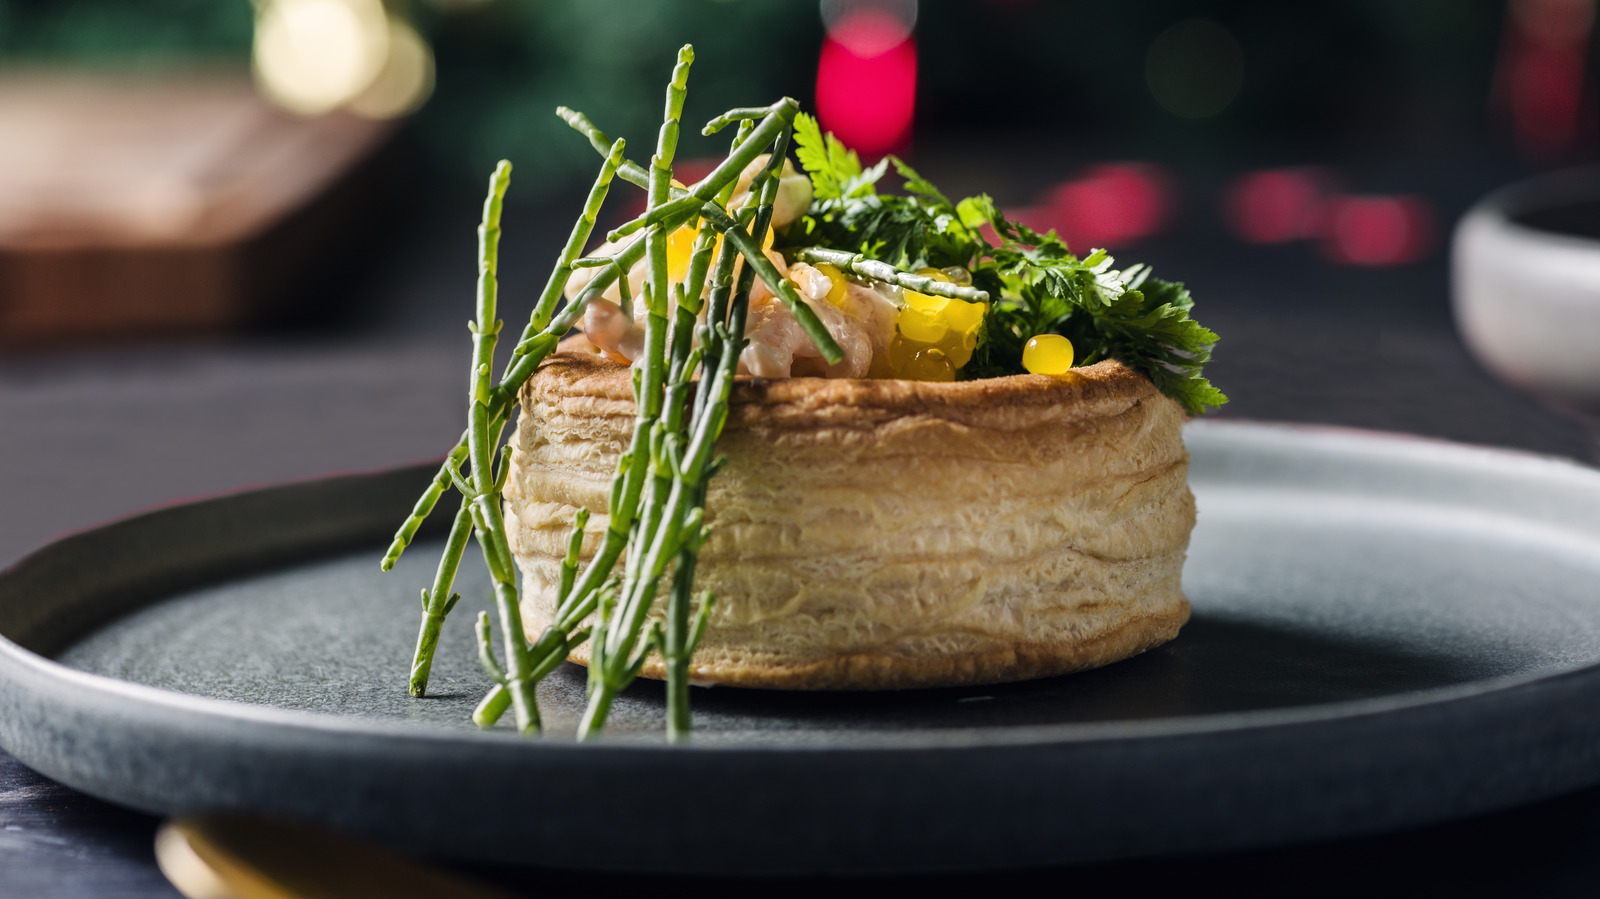 Light And Airy French Vol-Au-Vent Makes For A Decadent Vintage Appetizer